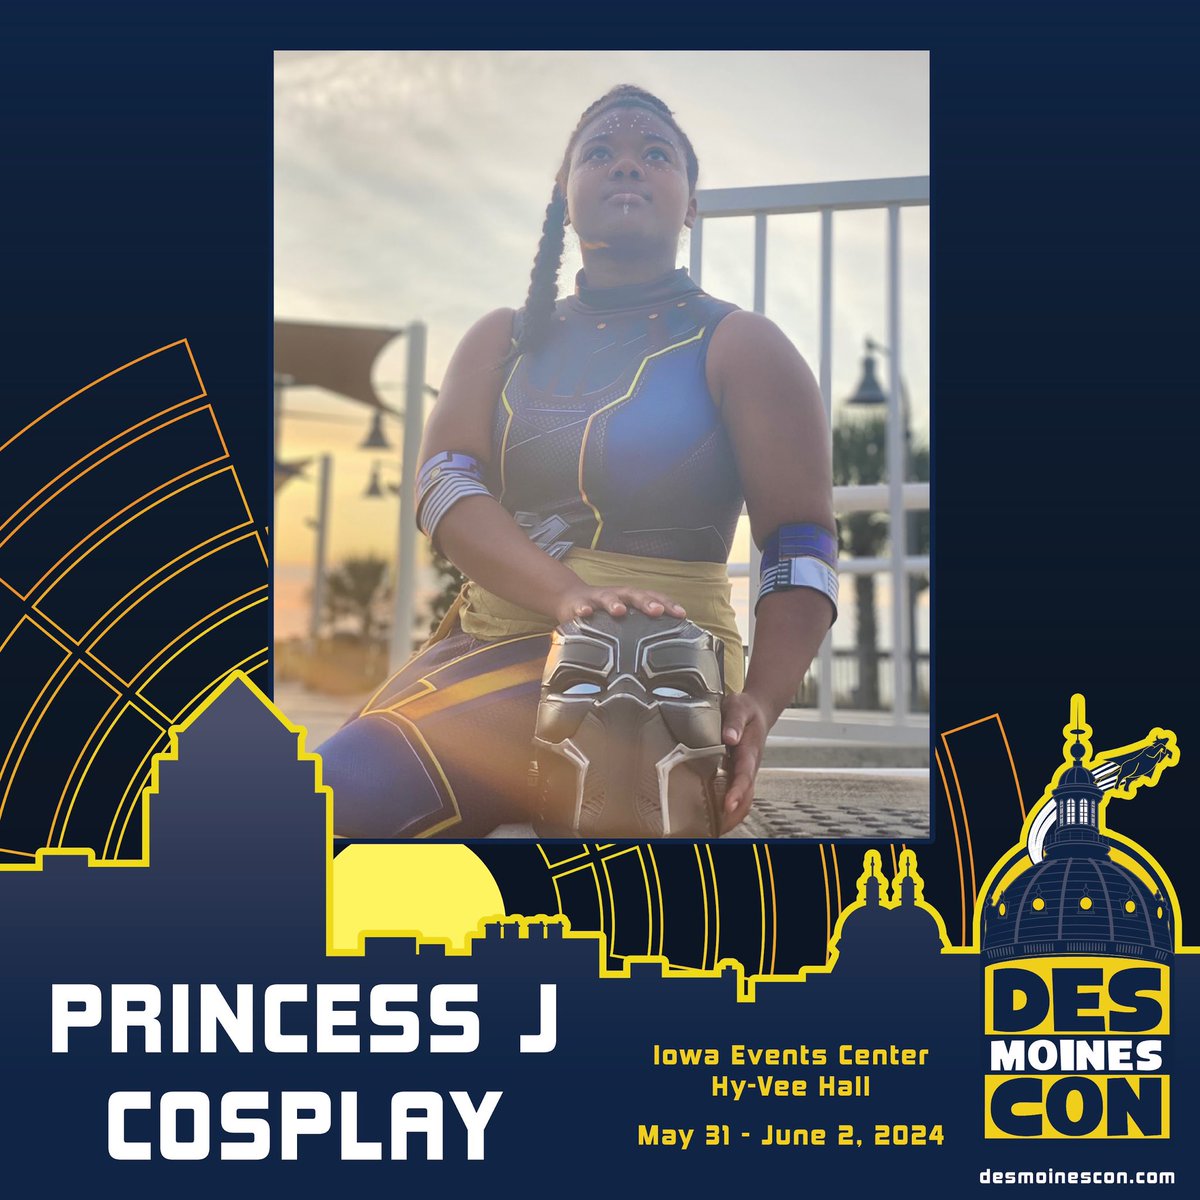 Princess J is joining us for Des Moines Con this year! 🥳 Don’t miss out on seeing this talented cosplayer and hairstylist with a passion for expression through research-driven cosplay styles! 👏👏